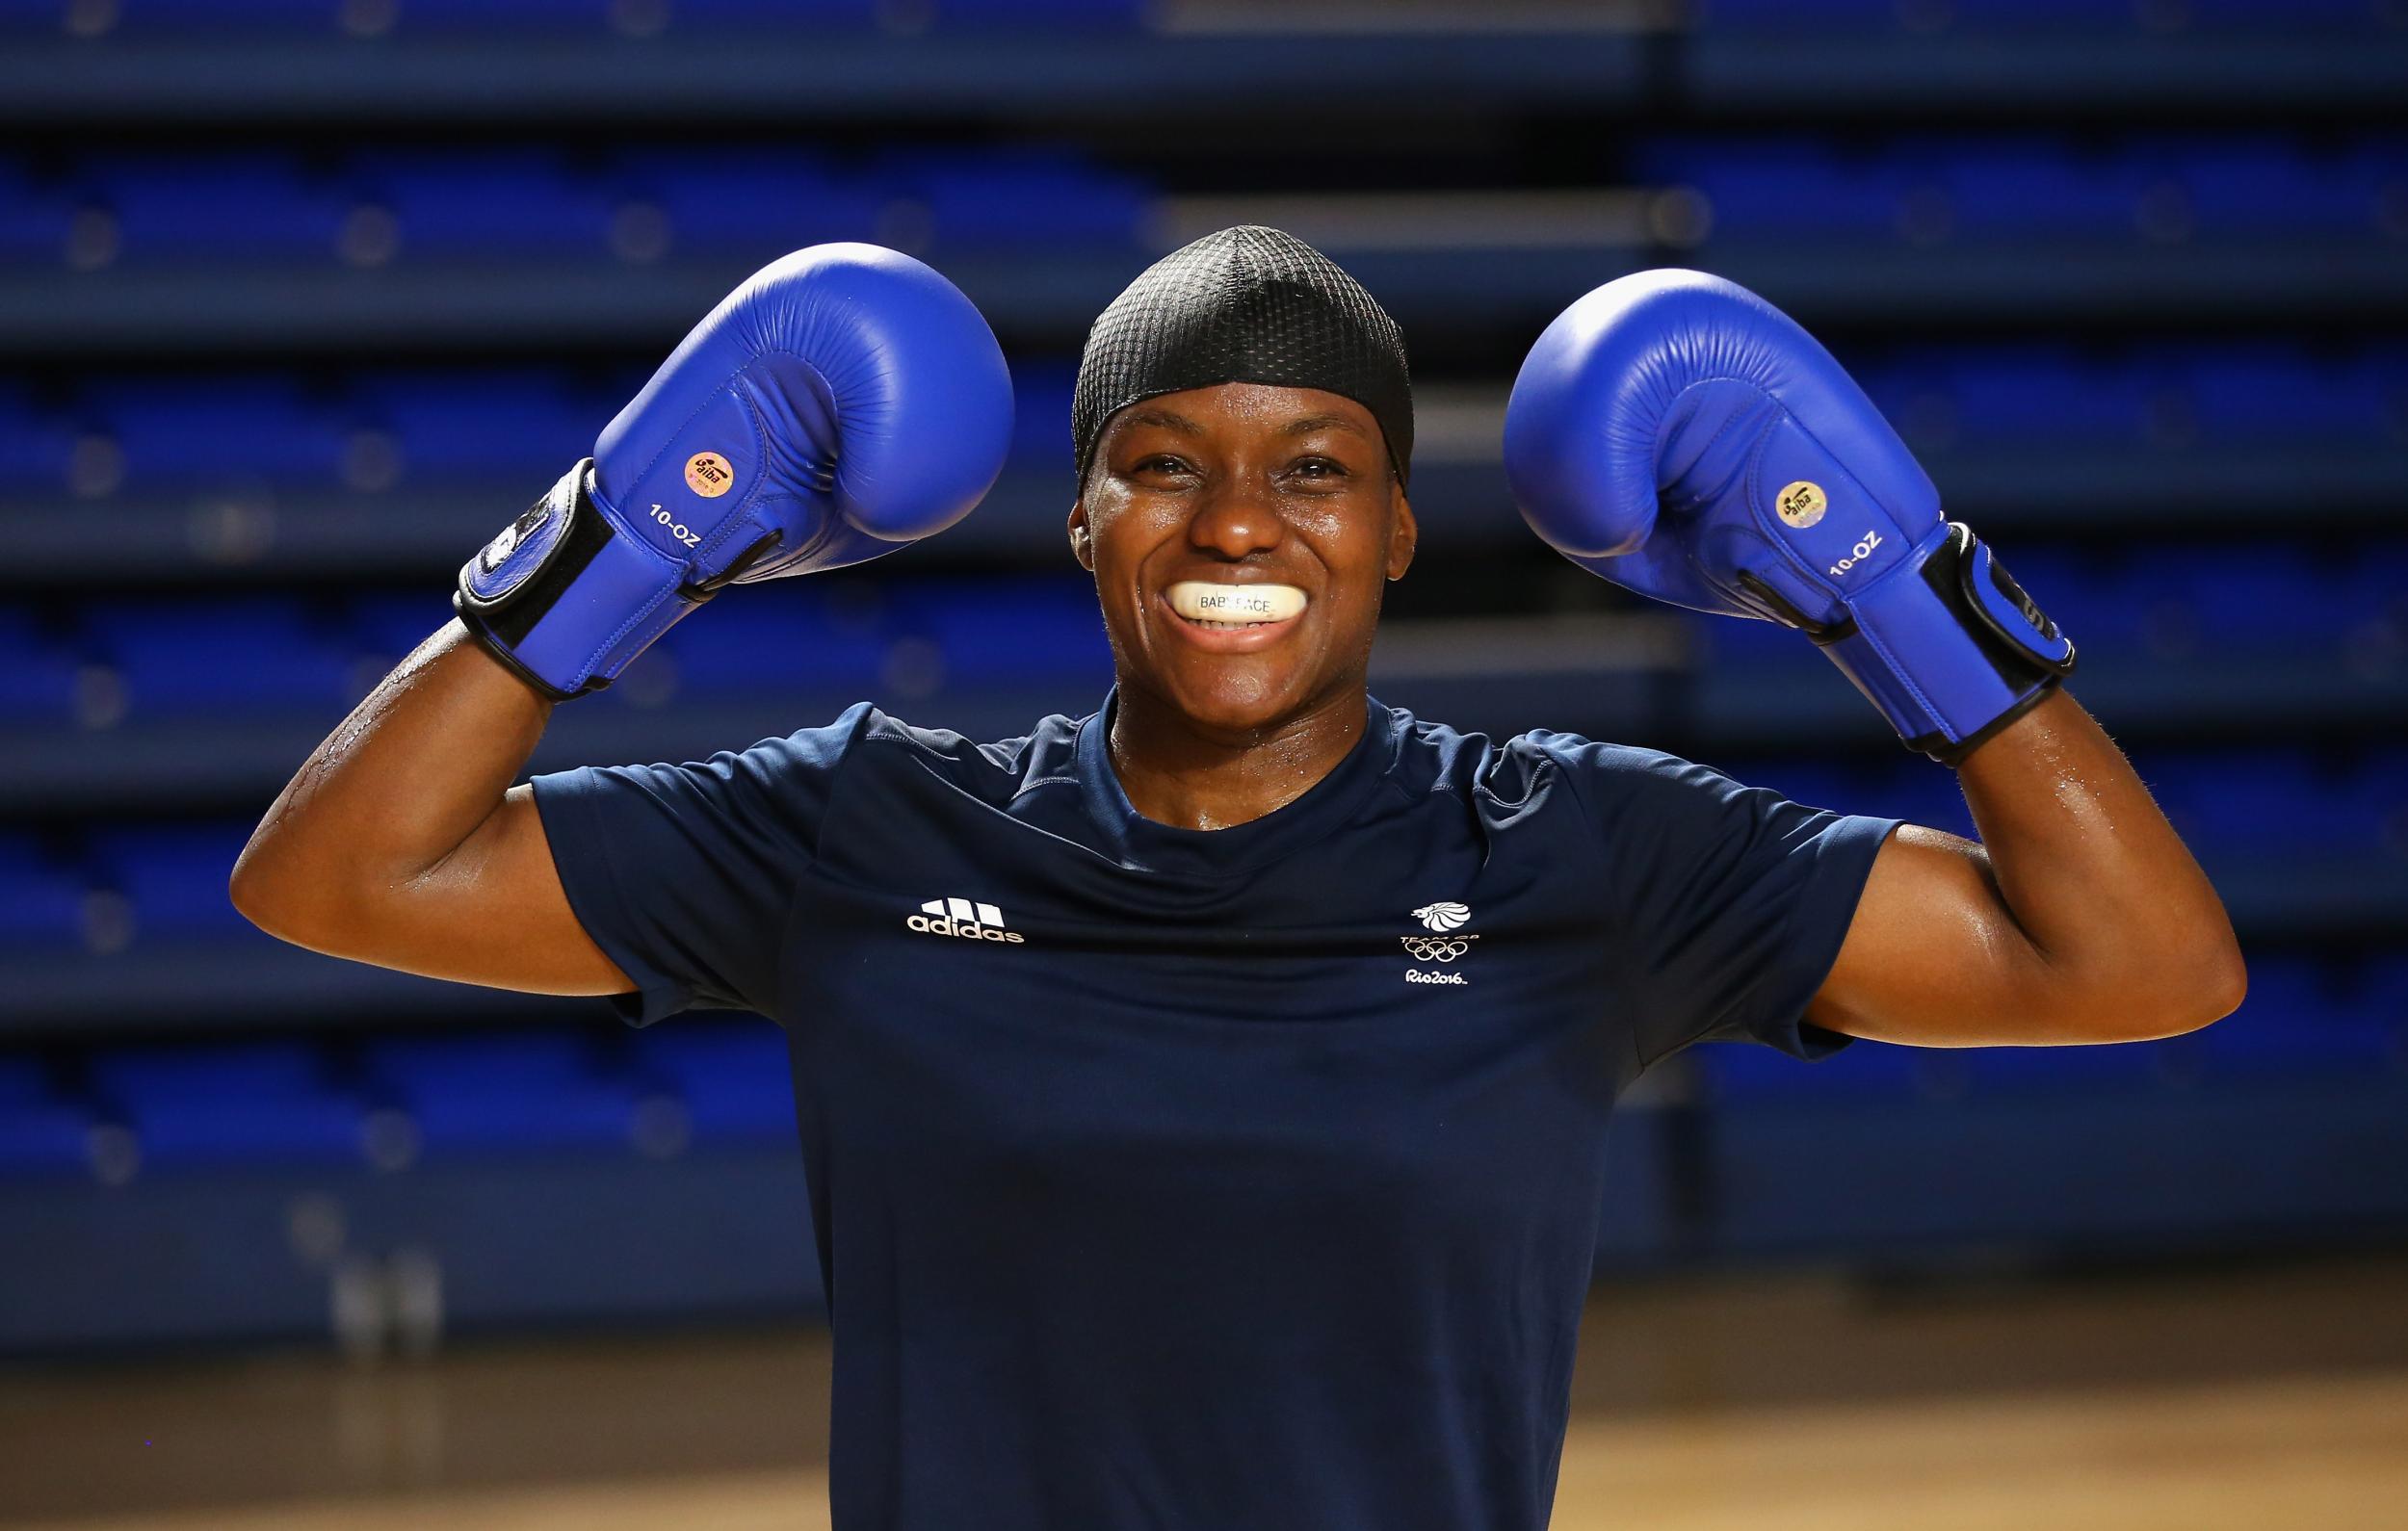 Rio 2016 Nicola Adams looks to make history as she prepares for 2012 title defence at Olympic Games The Independent The Independent